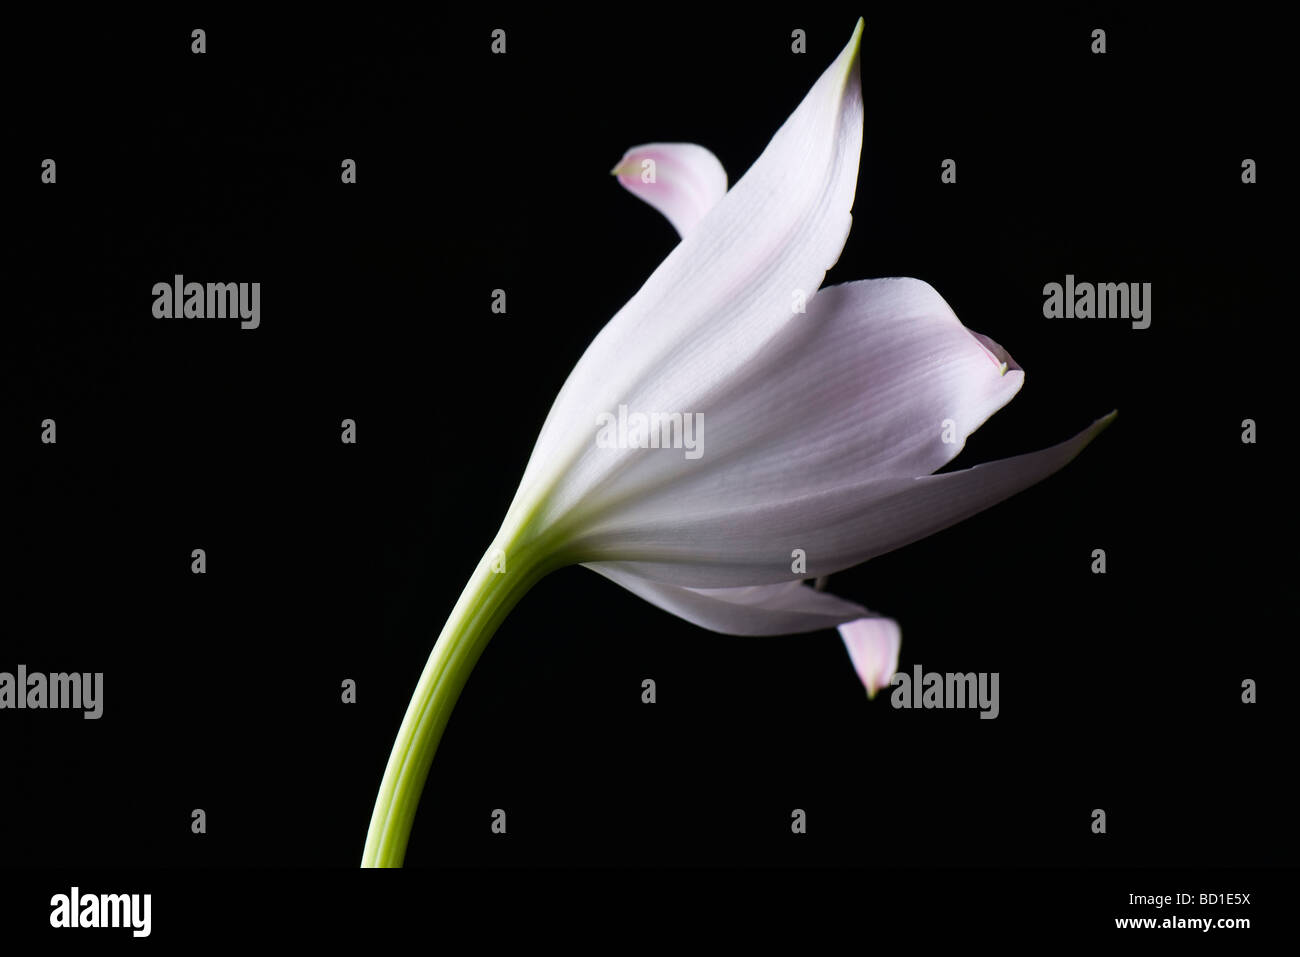 White lily, close-up Stock Photo